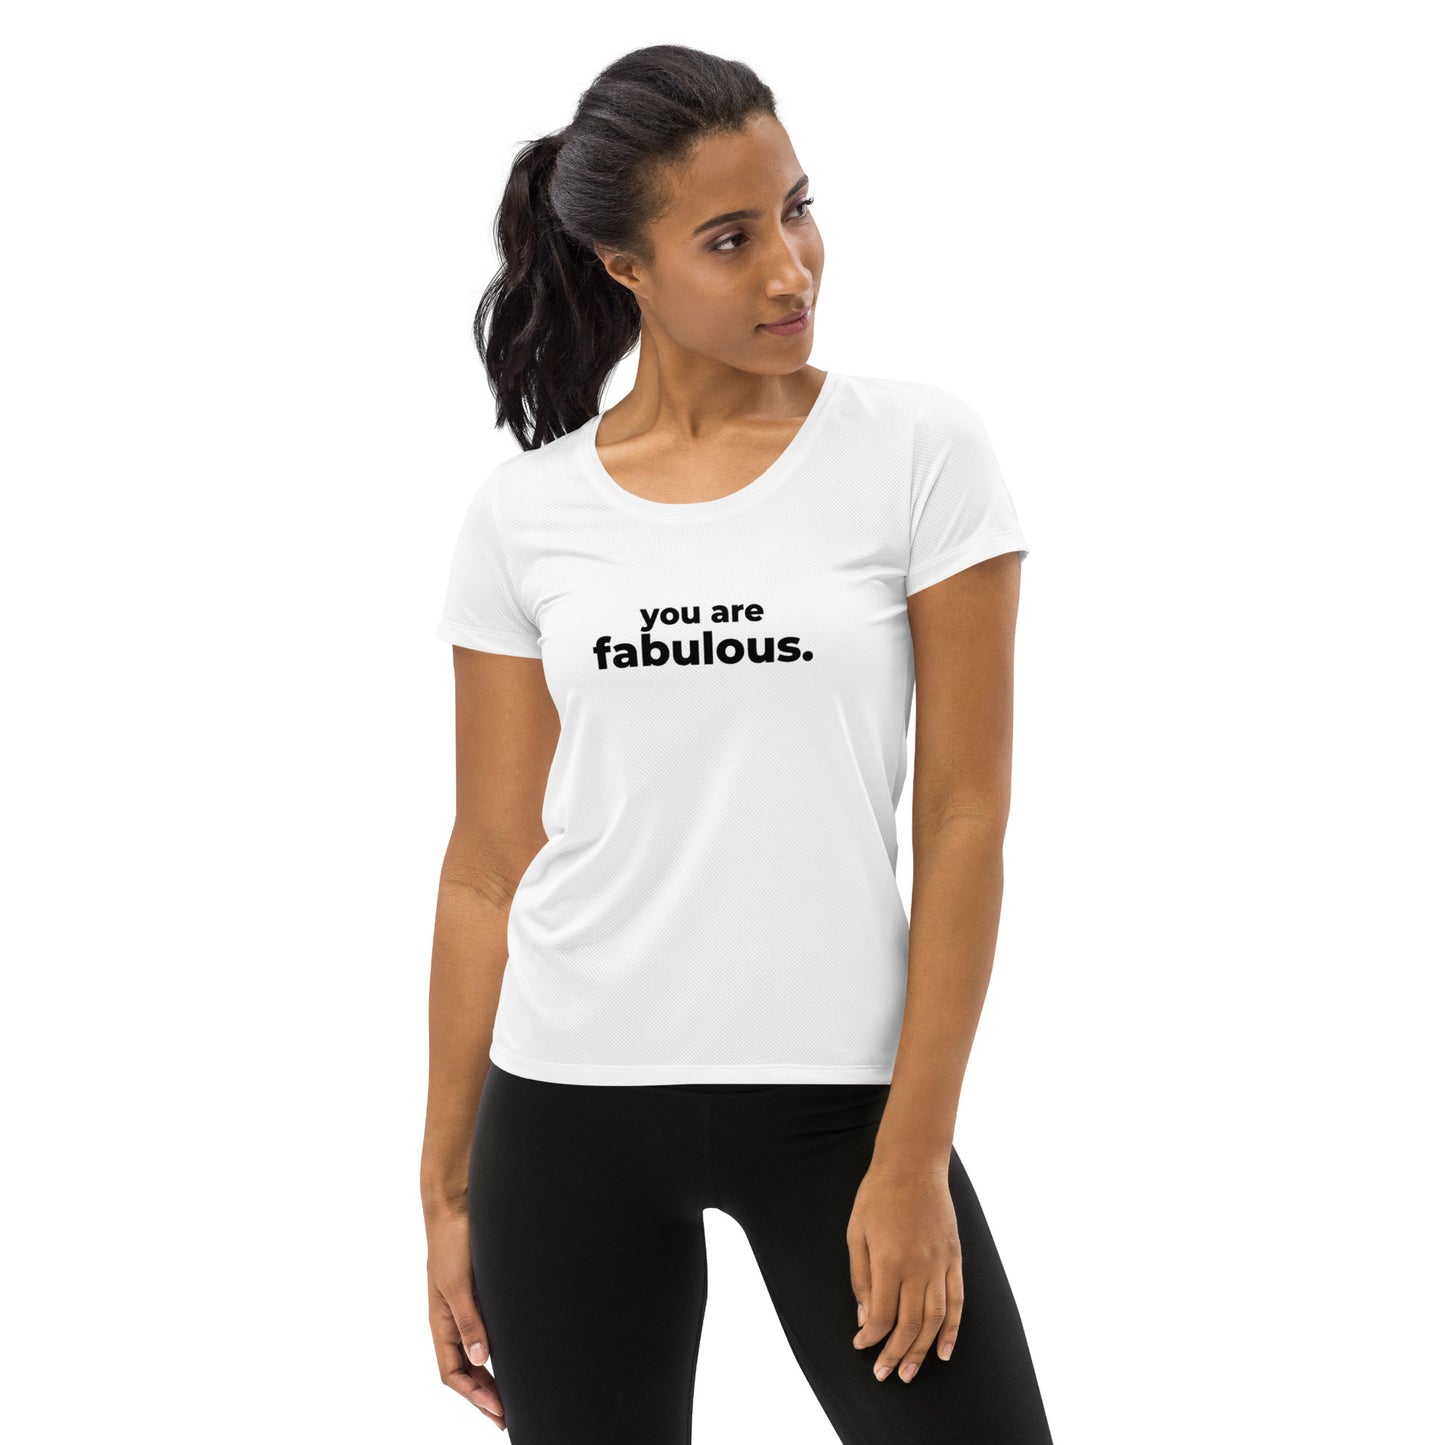 YOU ARE FABULOUS - Women's Athletic T-shirt